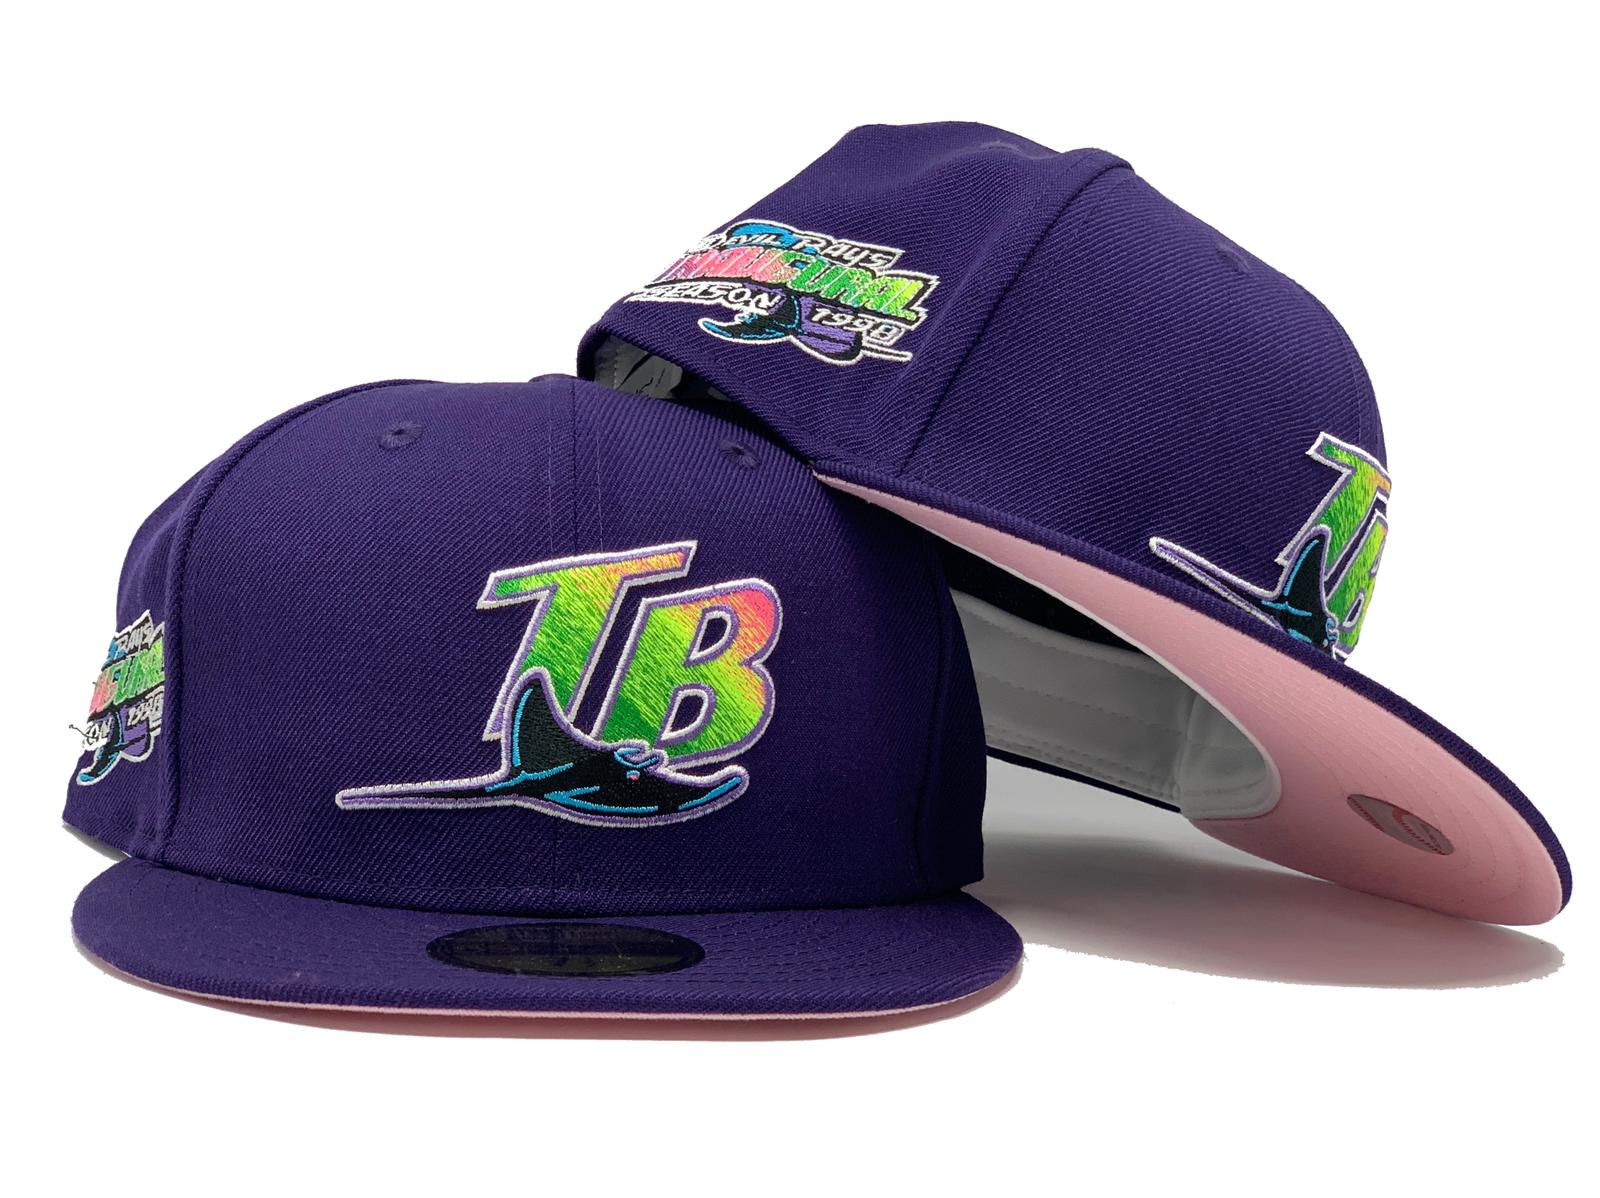 Hat Crawler - WHITE/PURPLE TAMPA BAY RAYS INAUGURAL SEASON TWO-TONE 59FIFTY  now available from @lids Celebrate Tampa Bay Rays history with this  Inaugural Season Two-Tone 59FIFTY fitted hat. This New Era cap